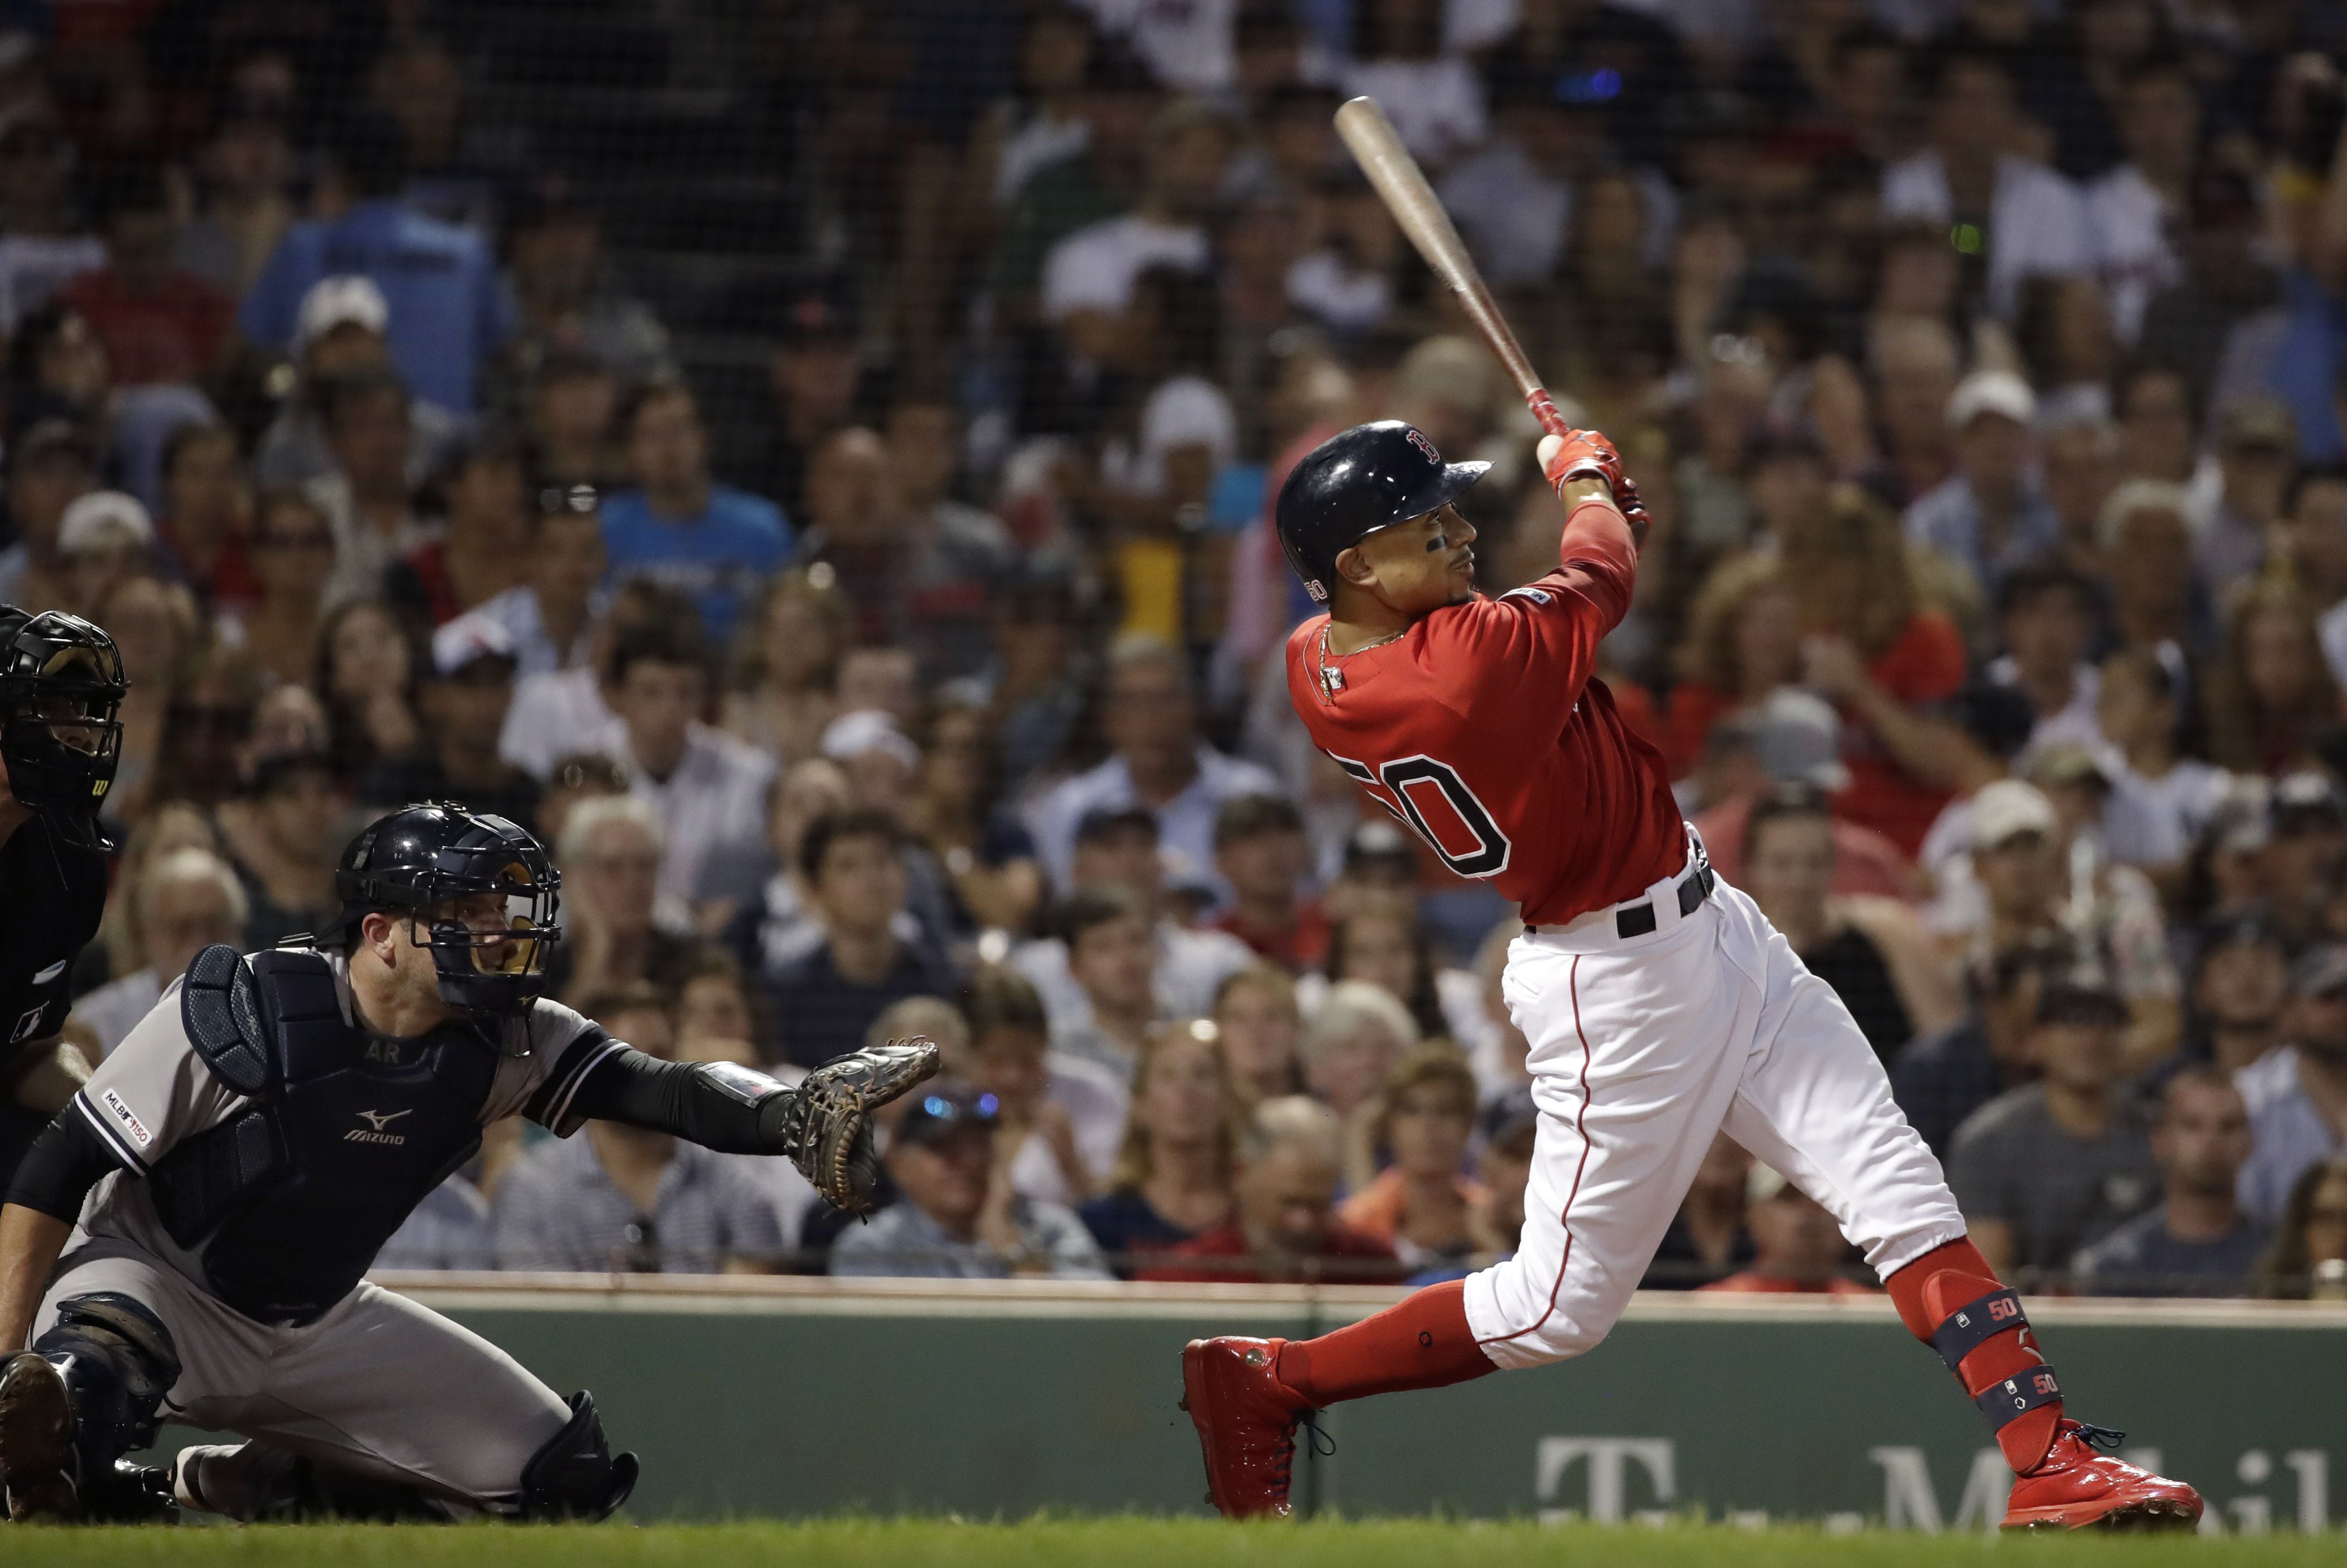 Boston Red Sox trade Mookie Betts, David Price to Dodgers, acquire  outfielder Alex Verdugo, righty Brusdar Graterol (reports) 